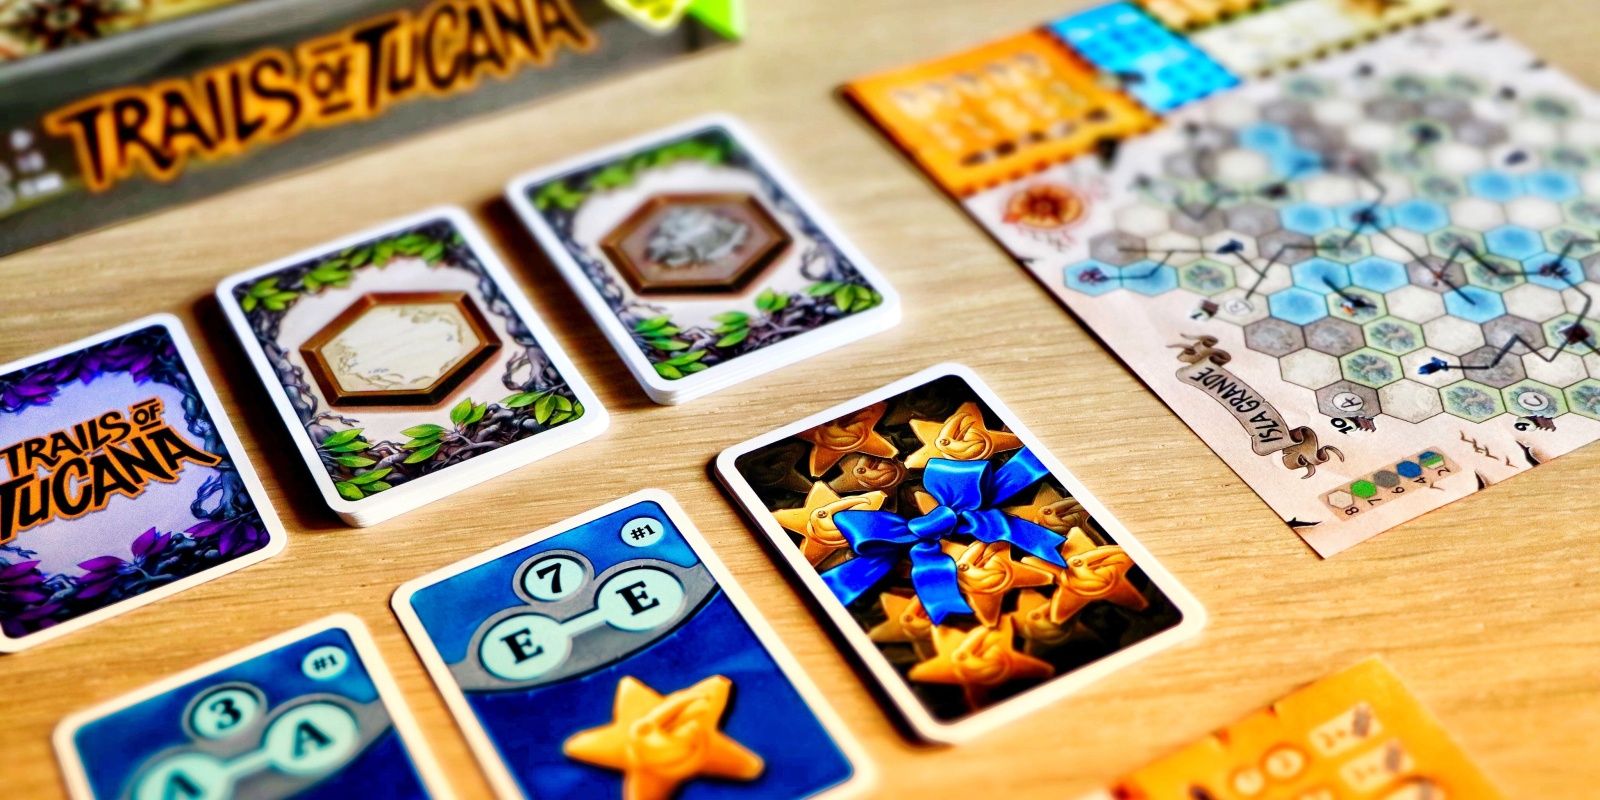 Trails Of Tucana Board Game Components On Table Being Played